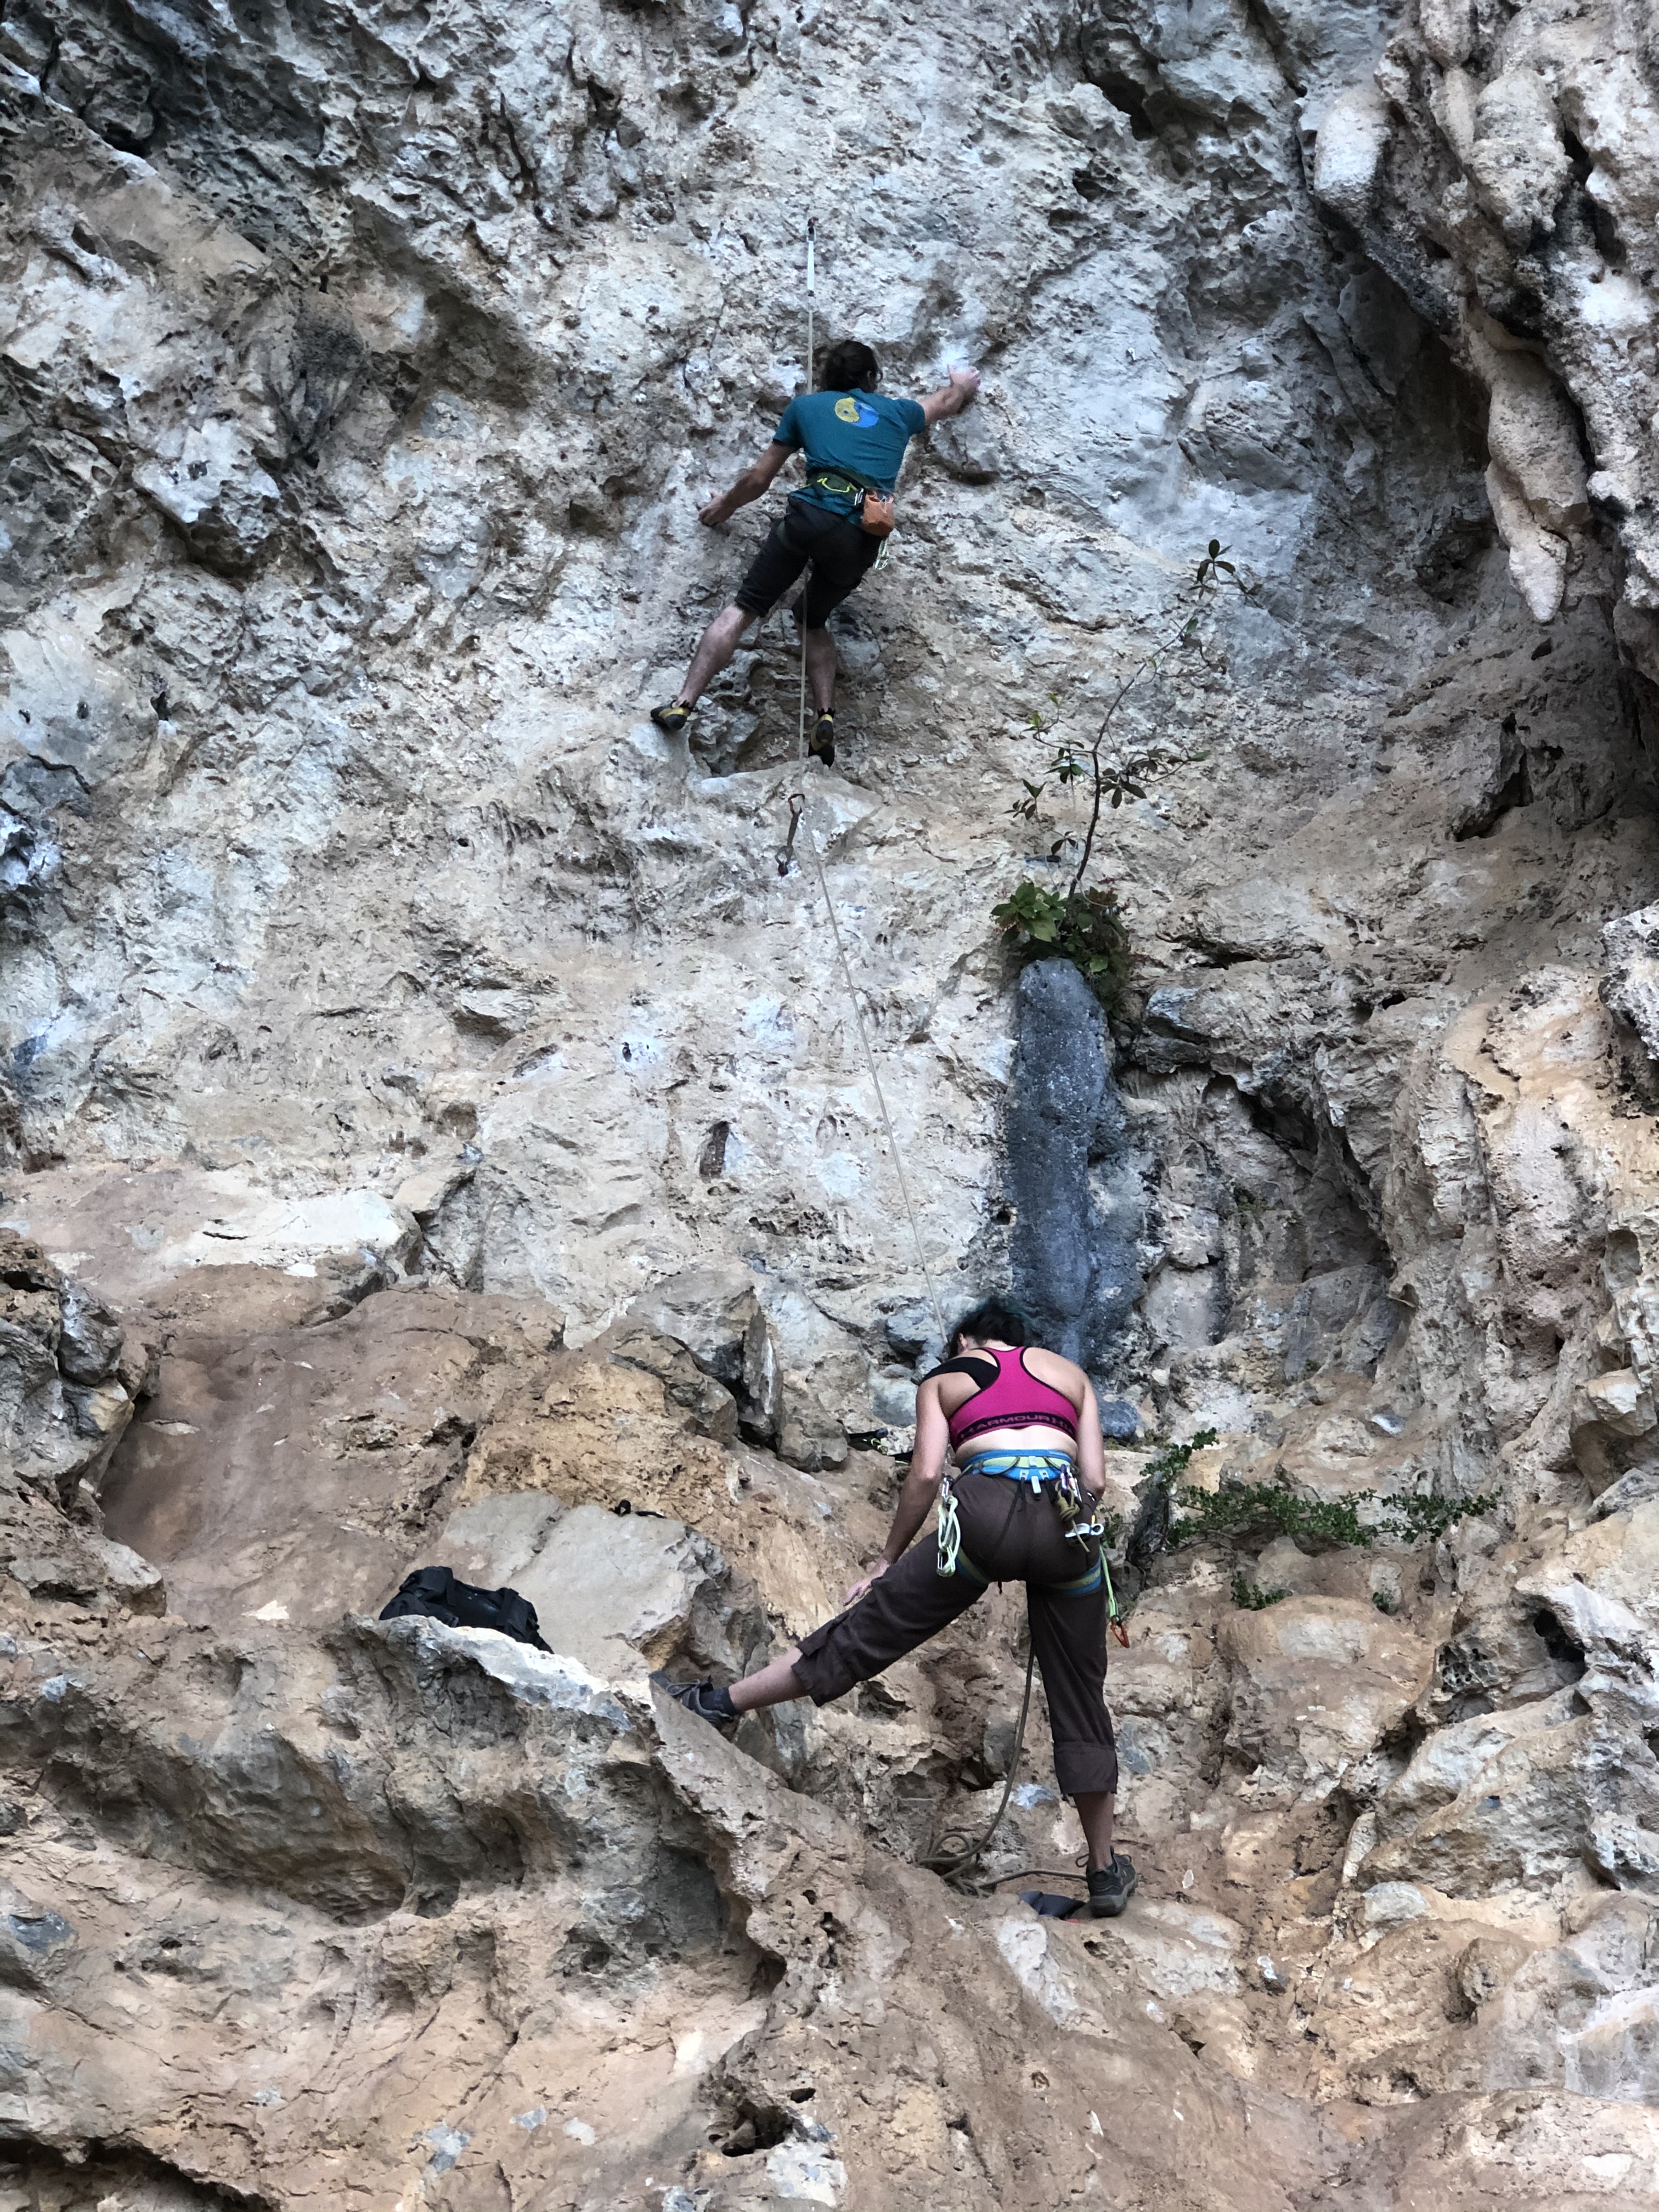 A female belaying a male climber in Vinales, Cuba